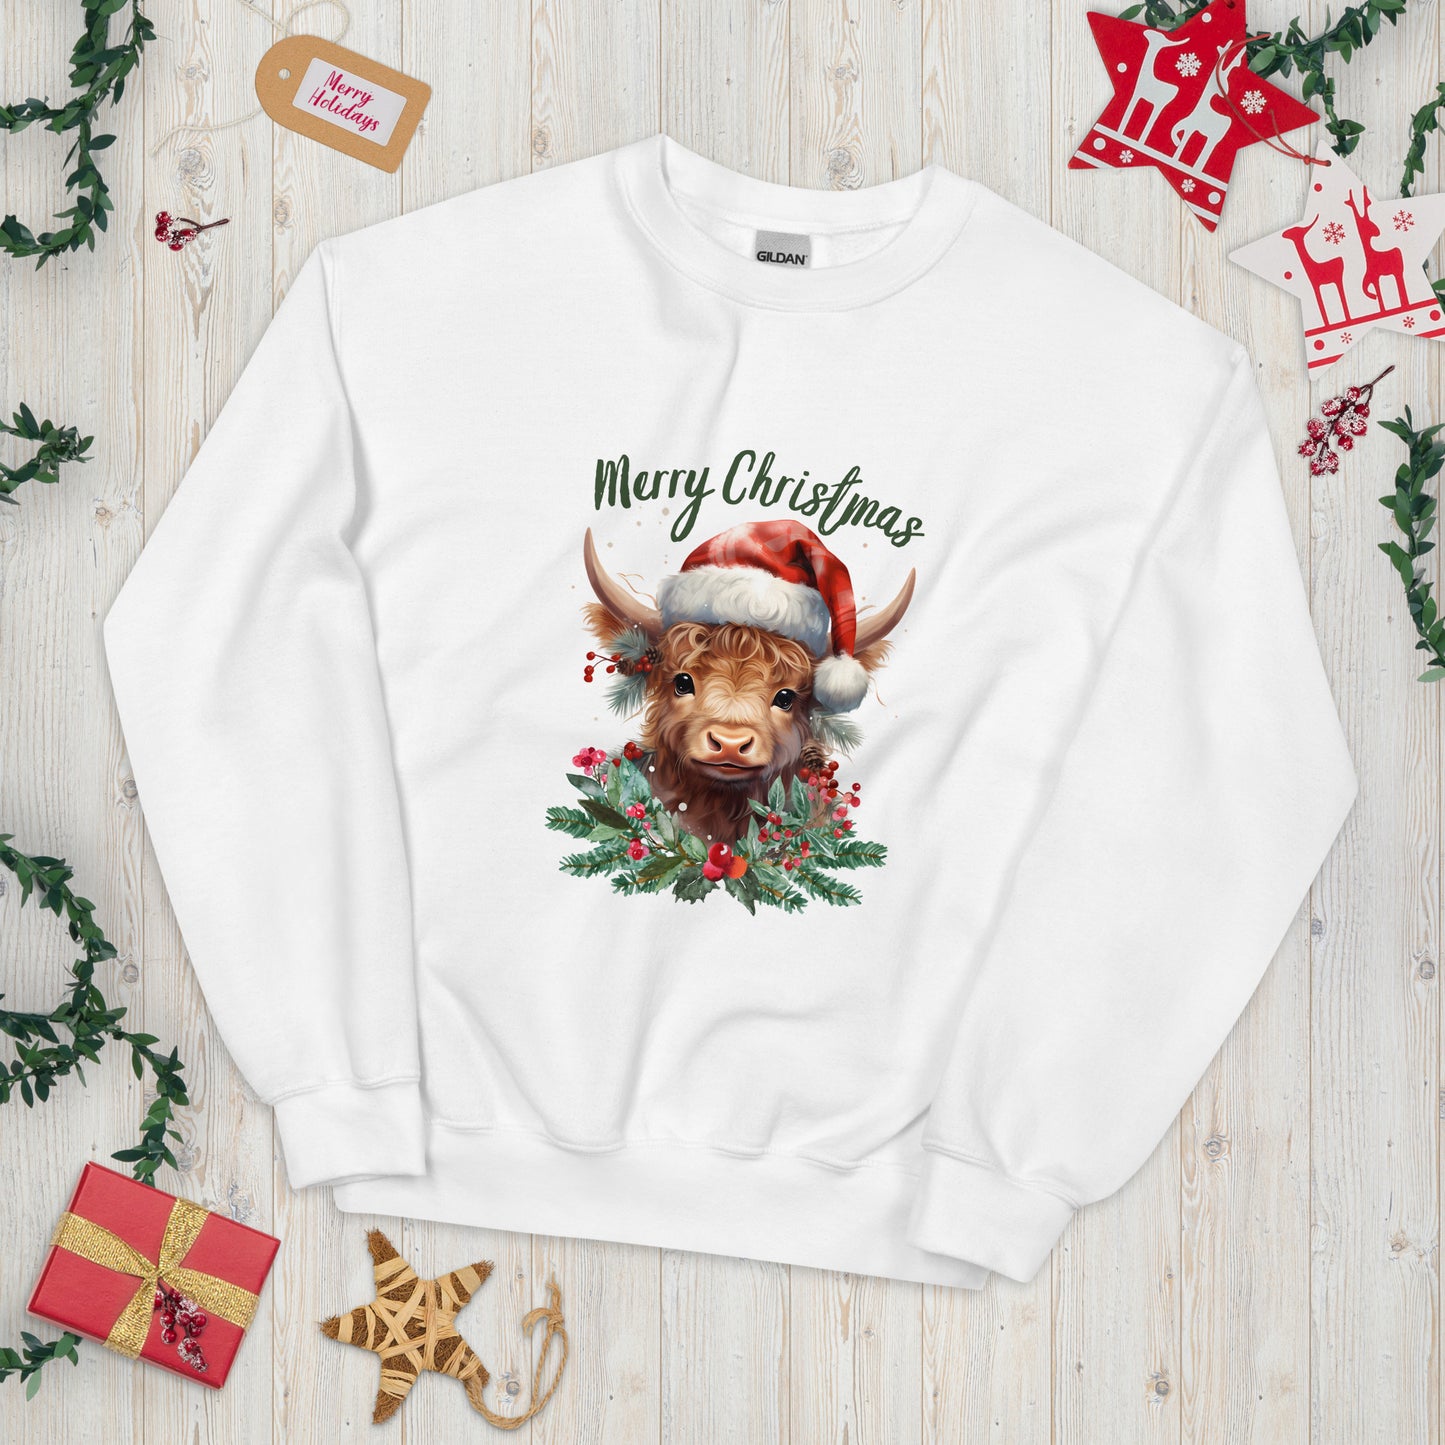 Christmas Highland Cow Pullover - High Quality Festive Family Unisex Sweatshirt, Gift for Cow Lovers, Cute Christmas Shirt, Cow with Santa Hat